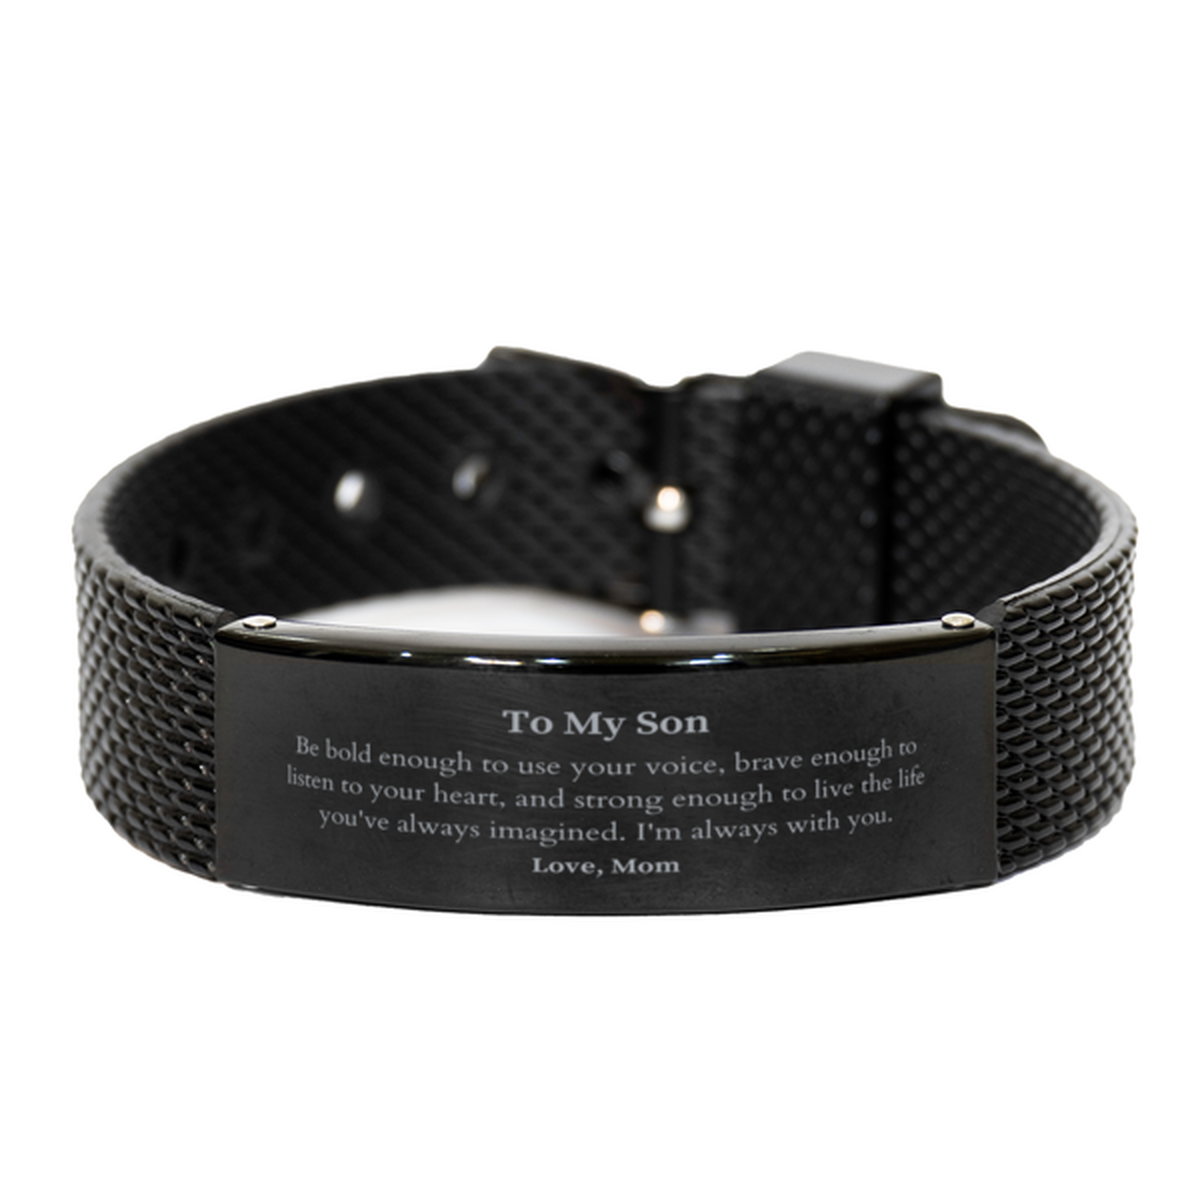 Keepsake Son Black Shark Mesh Bracelet Gift Idea Graduation Christmas Birthday Son from Mom, Son Be bold enough to use your voice, brave enough to listen to your heart. Love, Mom